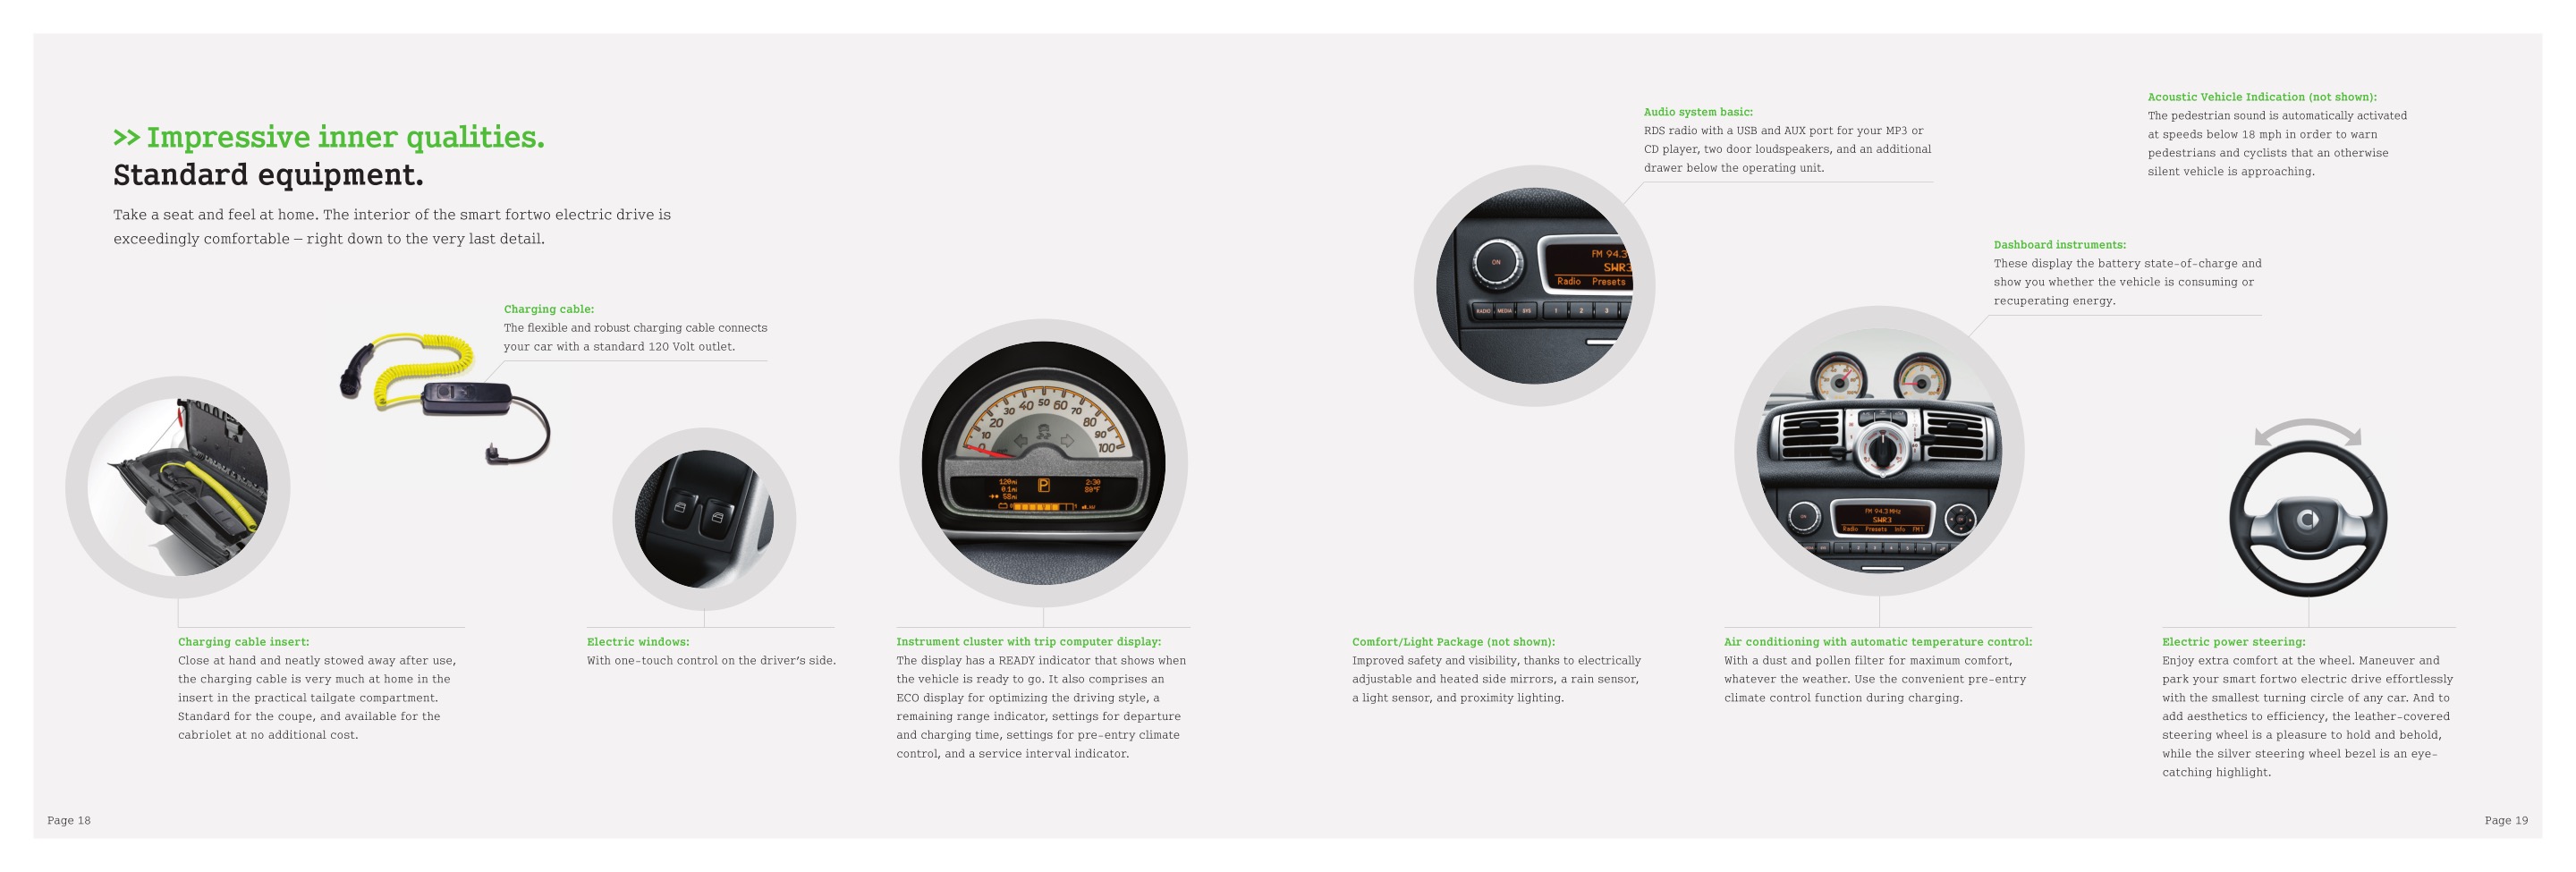 2015 Smart Fortwo Electric Brochure Page 14